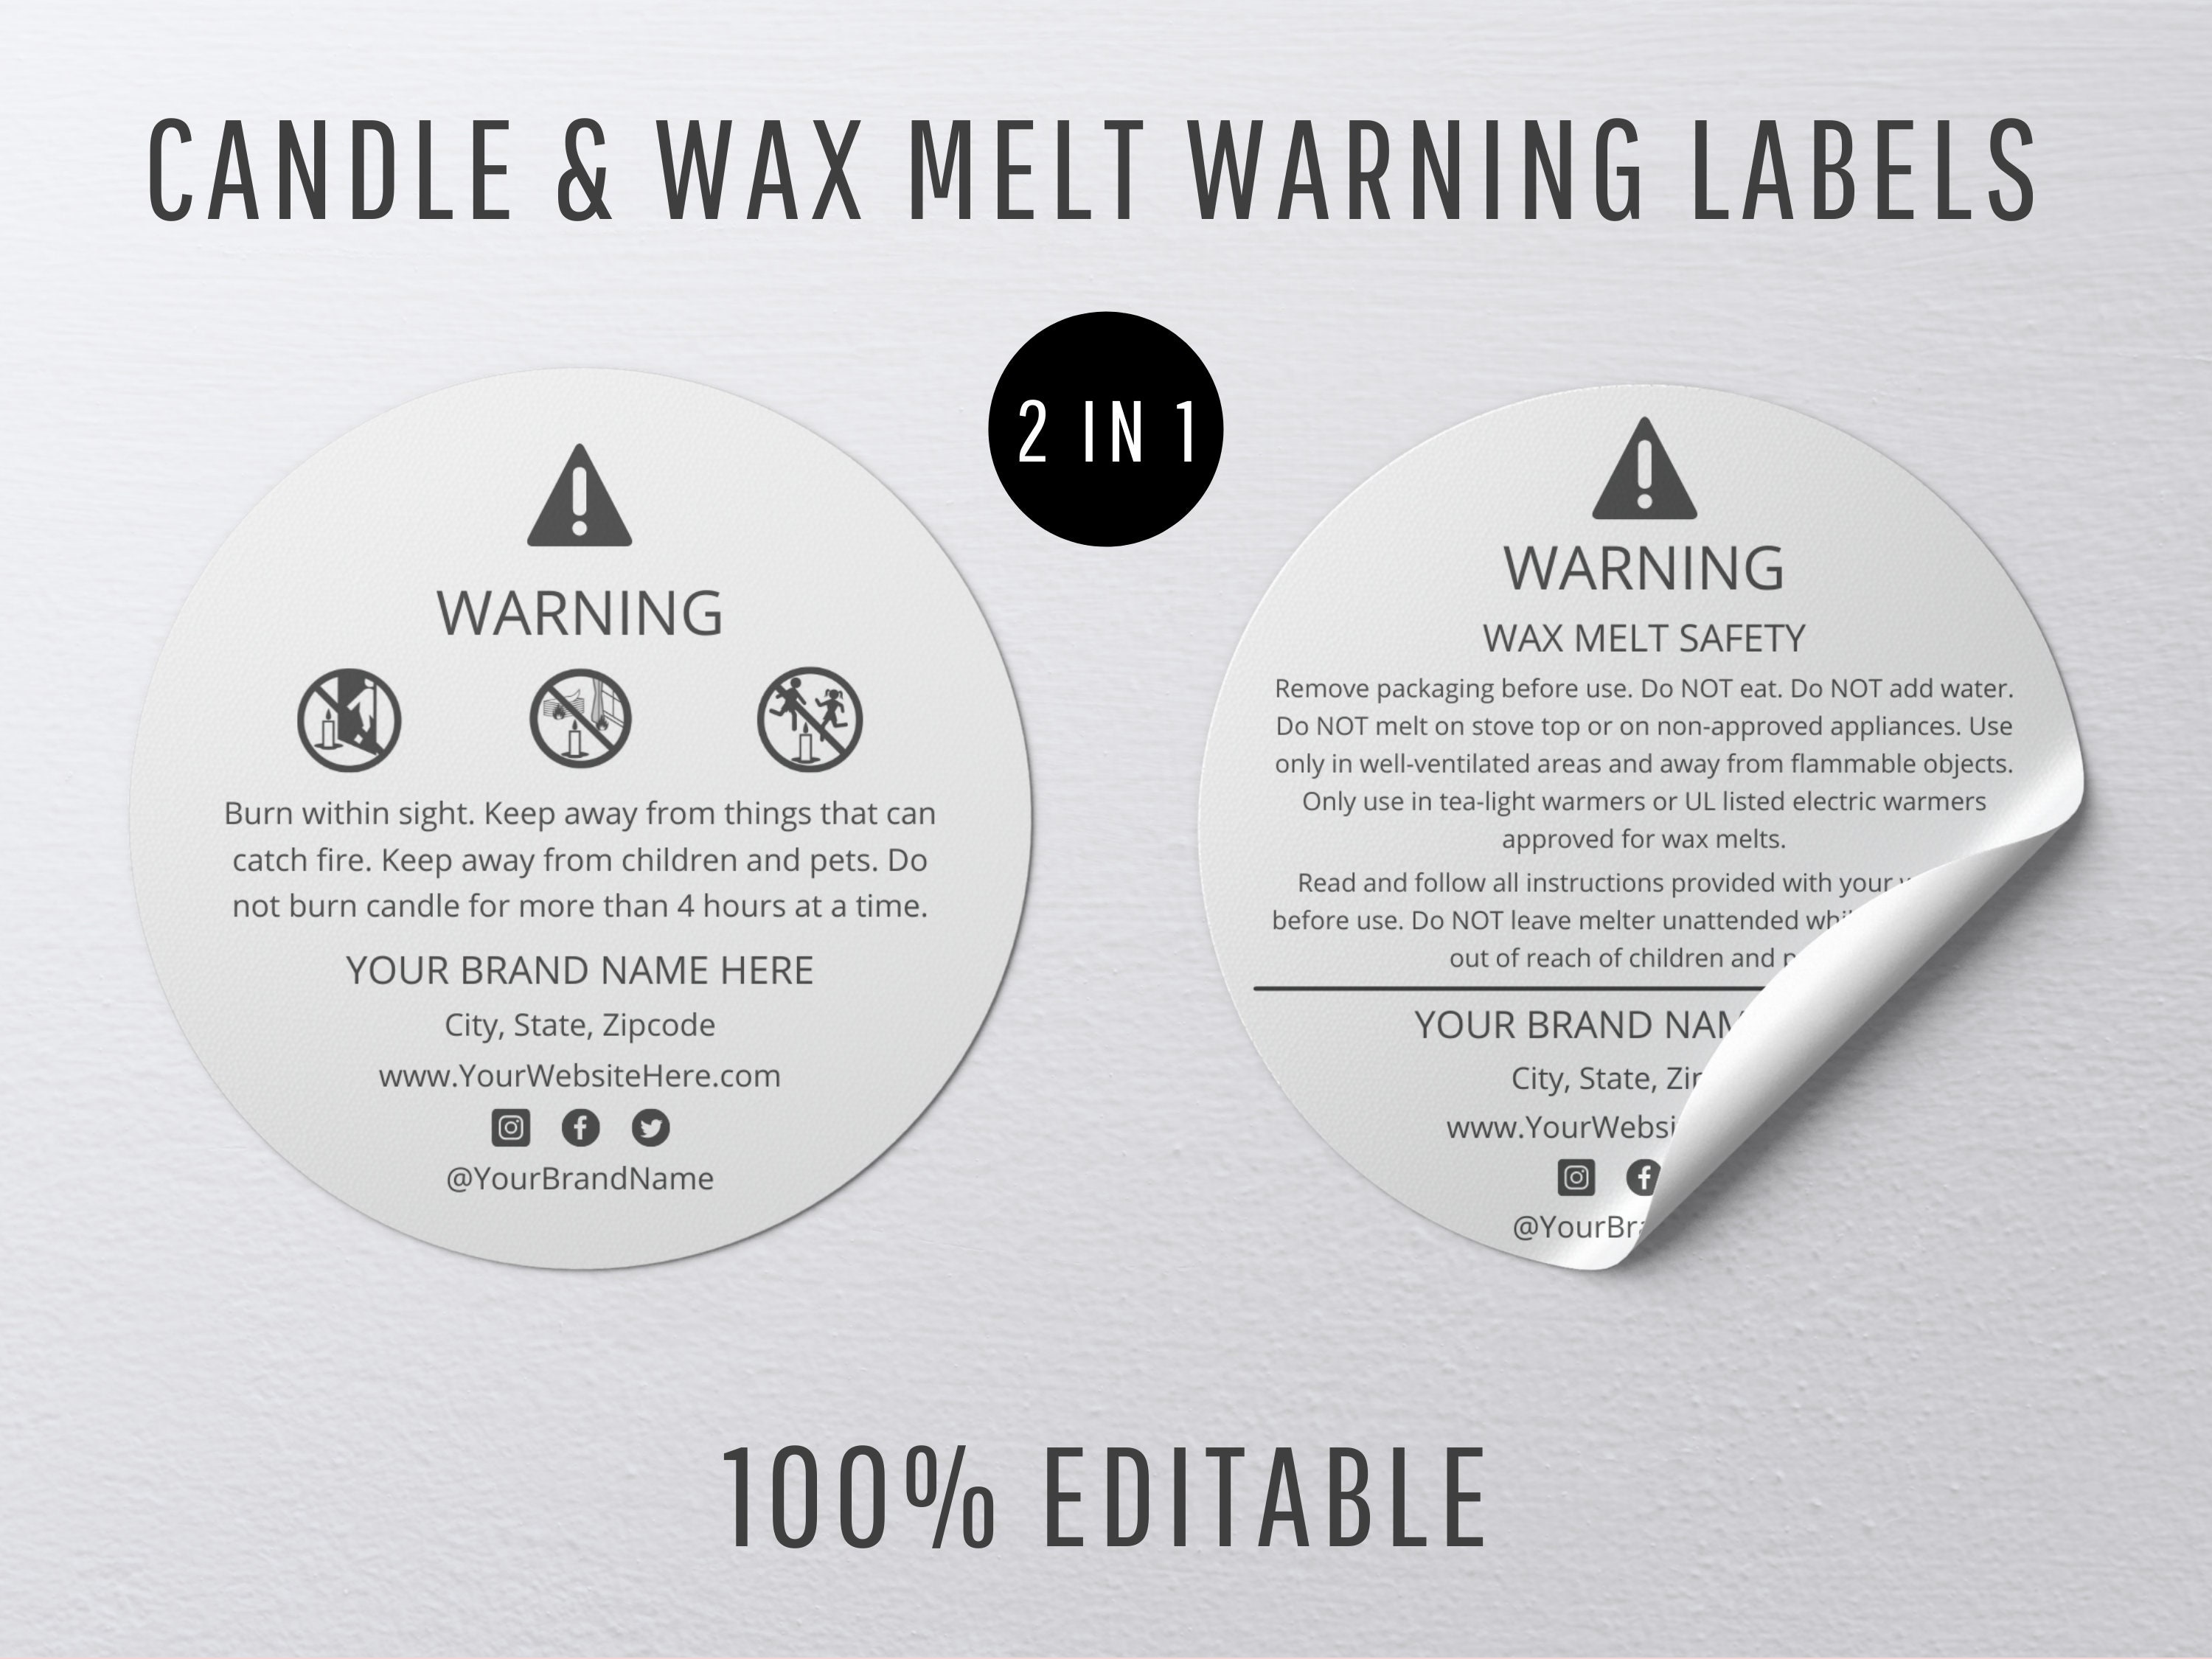 Candle & Wax Melt Warning Label Template, Editable Candle Safety